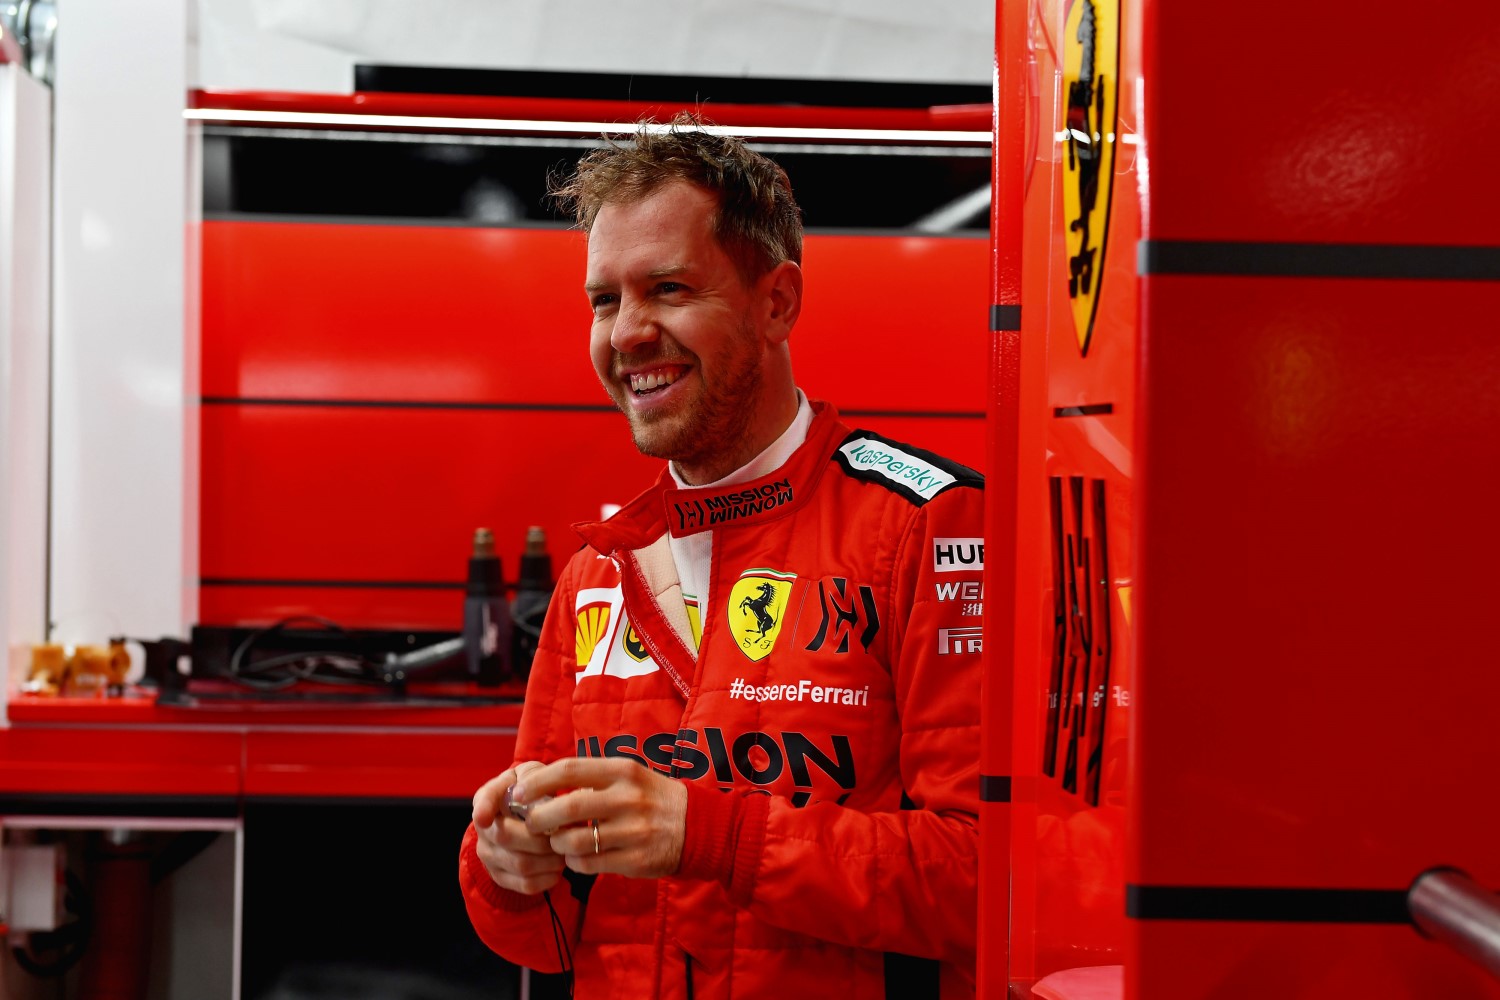 What happens if Vettel beats Leclerc? Or will Ferrari turn down his engine HP from the pitbox to ensure Leclerc is faster?